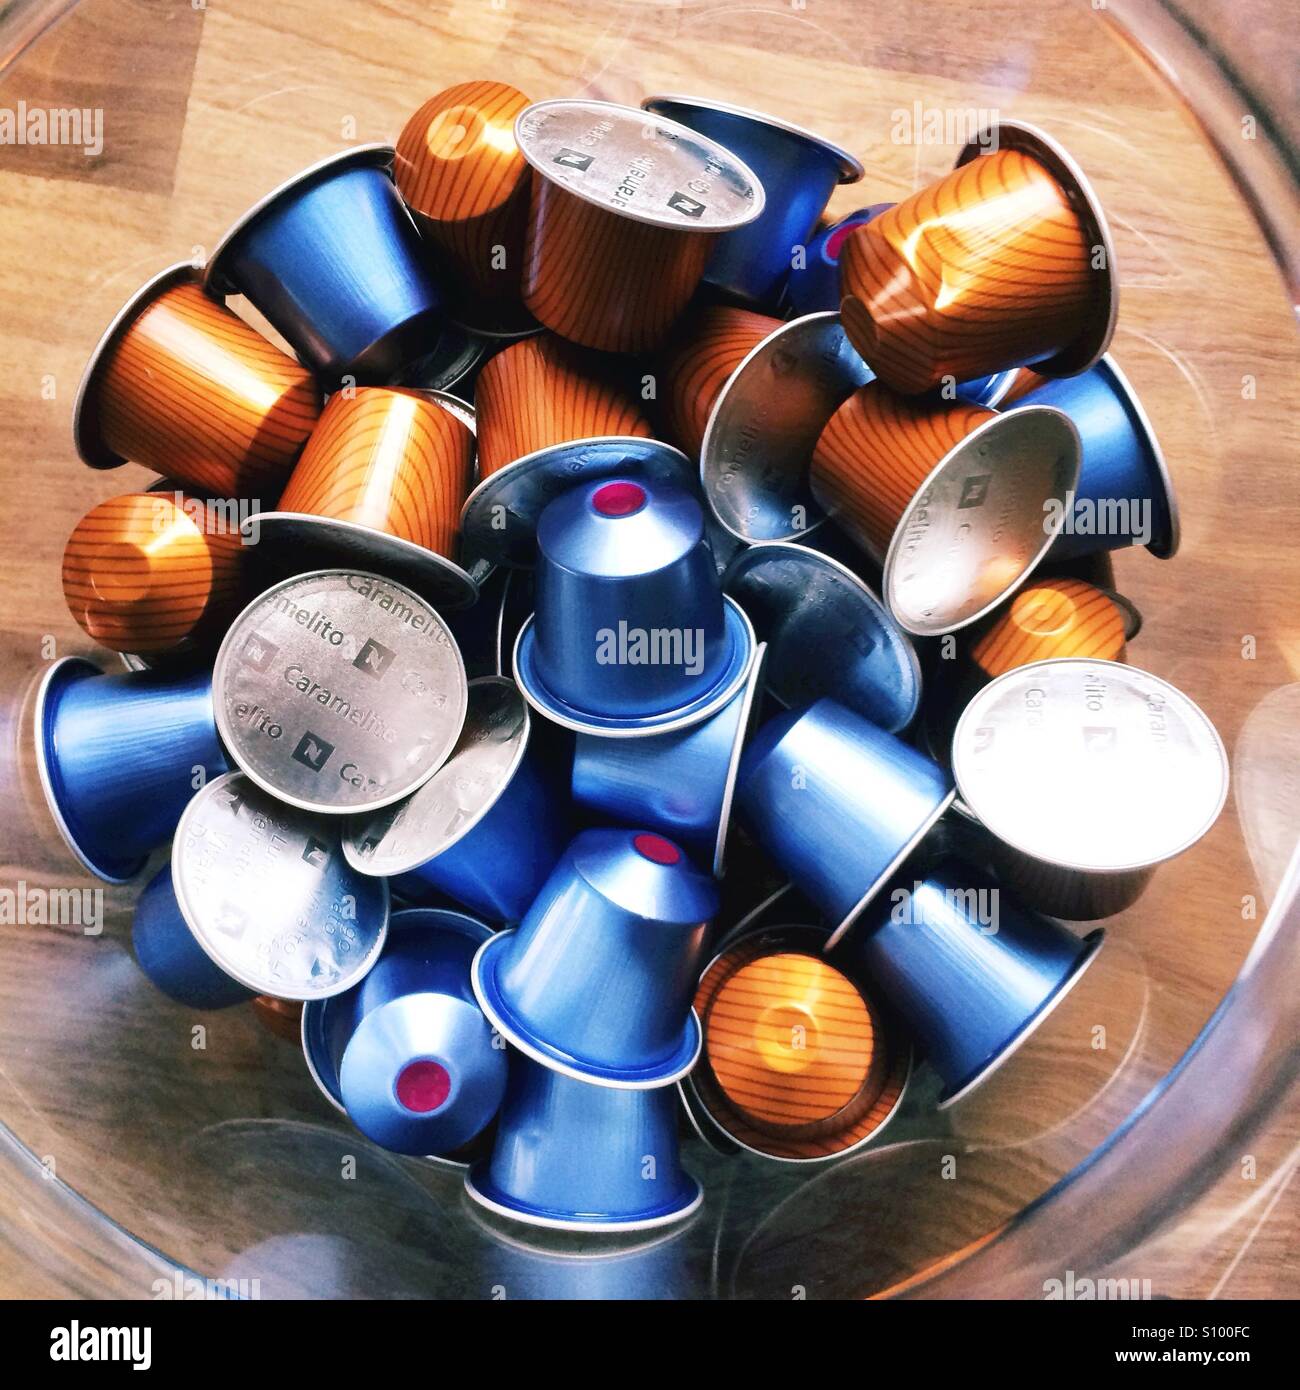 Favorite Nespresso Pods, Gallery posted by Andrea